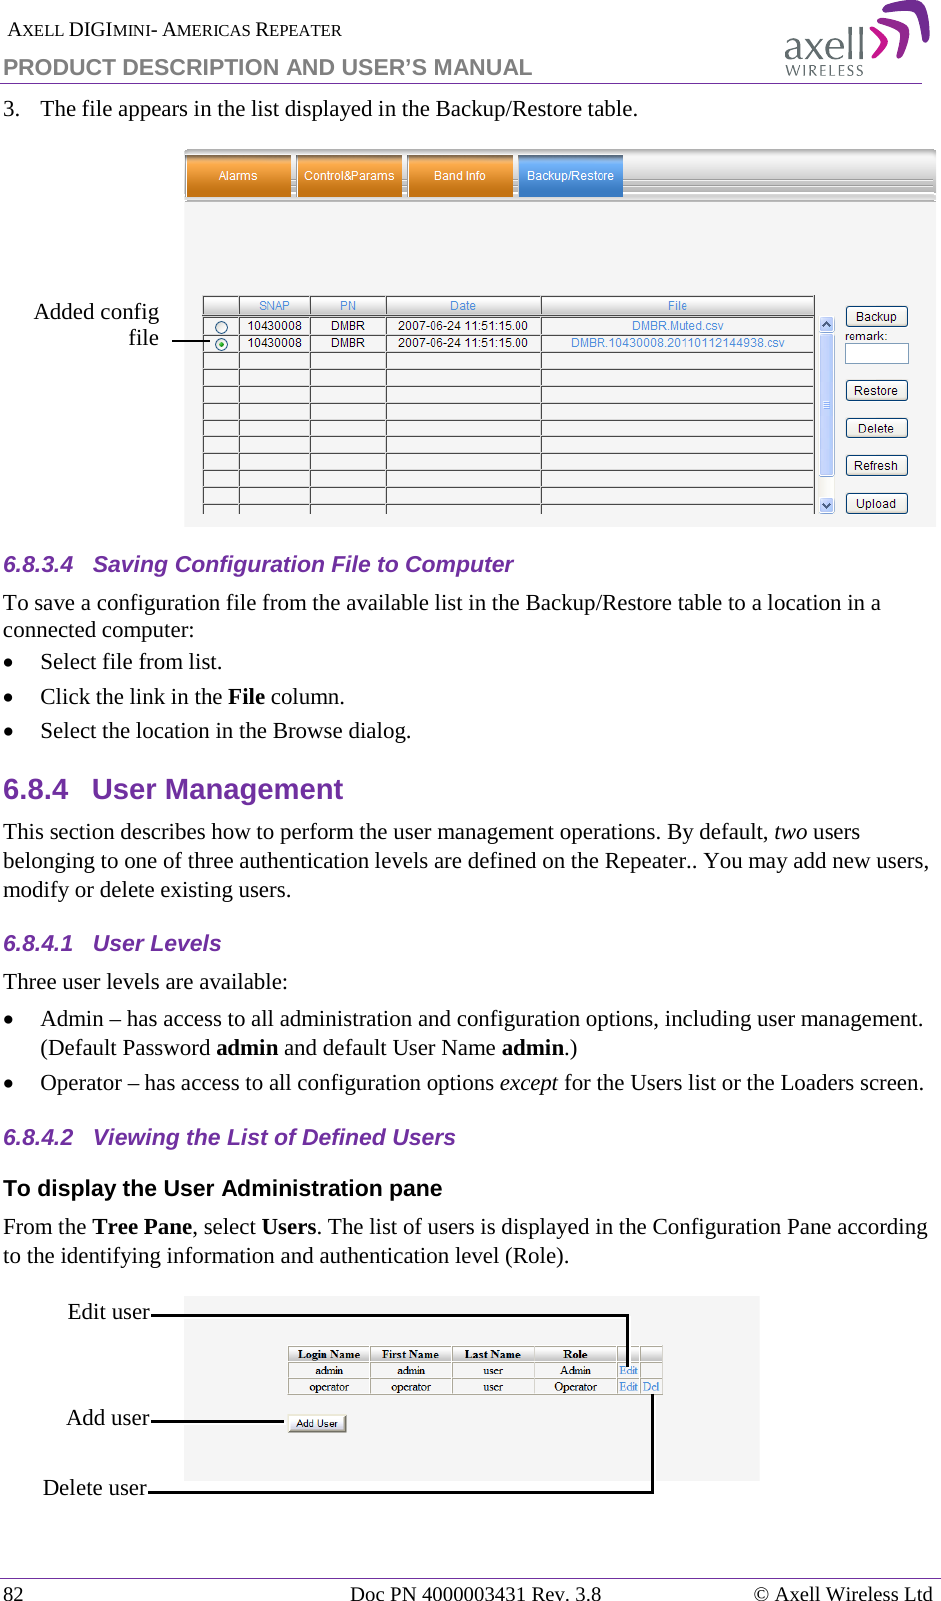  AXELL DIGIMINI- AMERICAS REPEATER PRODUCT DESCRIPTION AND USER’S MANUAL 82   Doc PN 4000003431 Rev. 3.8 © Axell Wireless Ltd 3.  The file appears in the list displayed in the Backup/Restore table.  6.8.3.4  Saving Configuration File to Computer To save a configuration file from the available list in the Backup/Restore table to a location in a connected computer: • Select file from list. • Click the link in the File column. • Select the location in the Browse dialog. 6.8.4  User Management This section describes how to perform the user management operations. By default, two users belonging to one of three authentication levels are defined on the Repeater.. You may add new users, modify or delete existing users.  6.8.4.1  User Levels Three user levels are available:  • Admin – has access to all administration and configuration options, including user management. (Default Password admin and default User Name admin.) • Operator – has access to all configuration options except for the Users list or the Loaders screen.  6.8.4.2  Viewing the List of Defined Users  To display the User Administration pane From the Tree Pane, select Users. The list of users is displayed in the Configuration Pane according to the identifying information and authentication level (Role).   Edit user  Delete user  Add user Added config file  